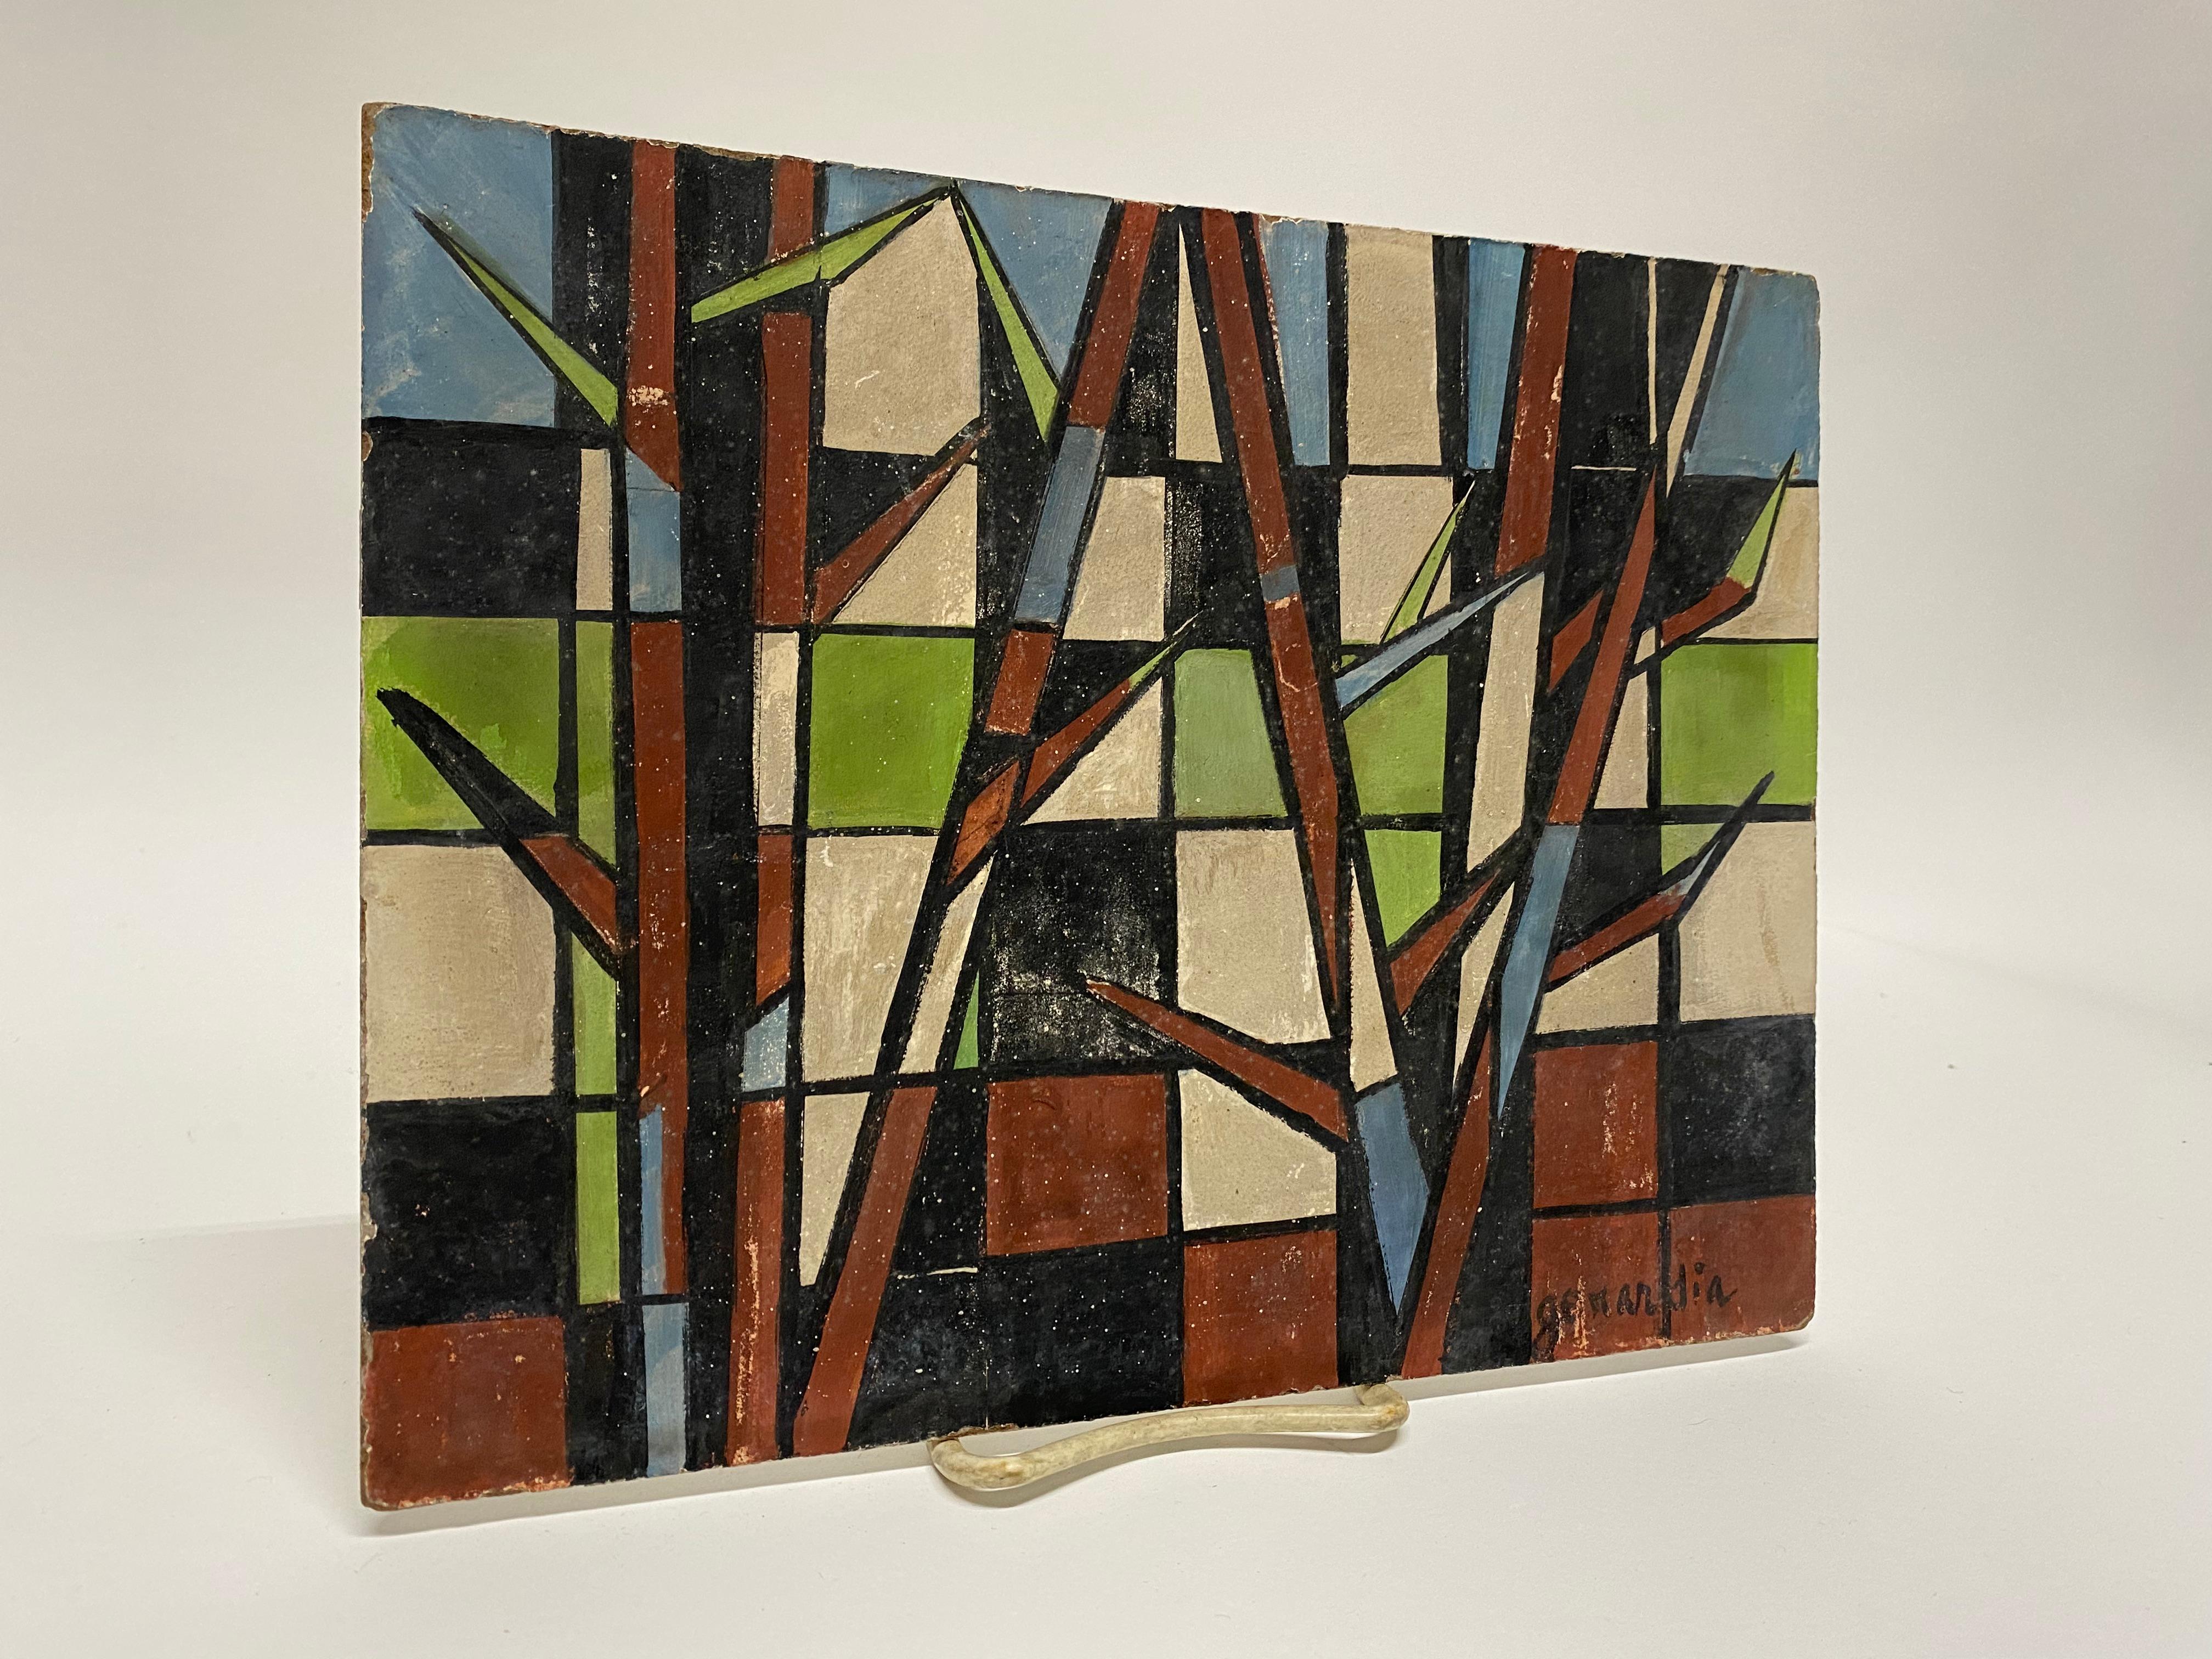 Geometric landscape by Helen Gerardia. Signed lower right, Gerardia. Circa 1950-60. Good overall condition with some surface paint scuffs and losses. Overall wear of surface colors.

Approximately 10